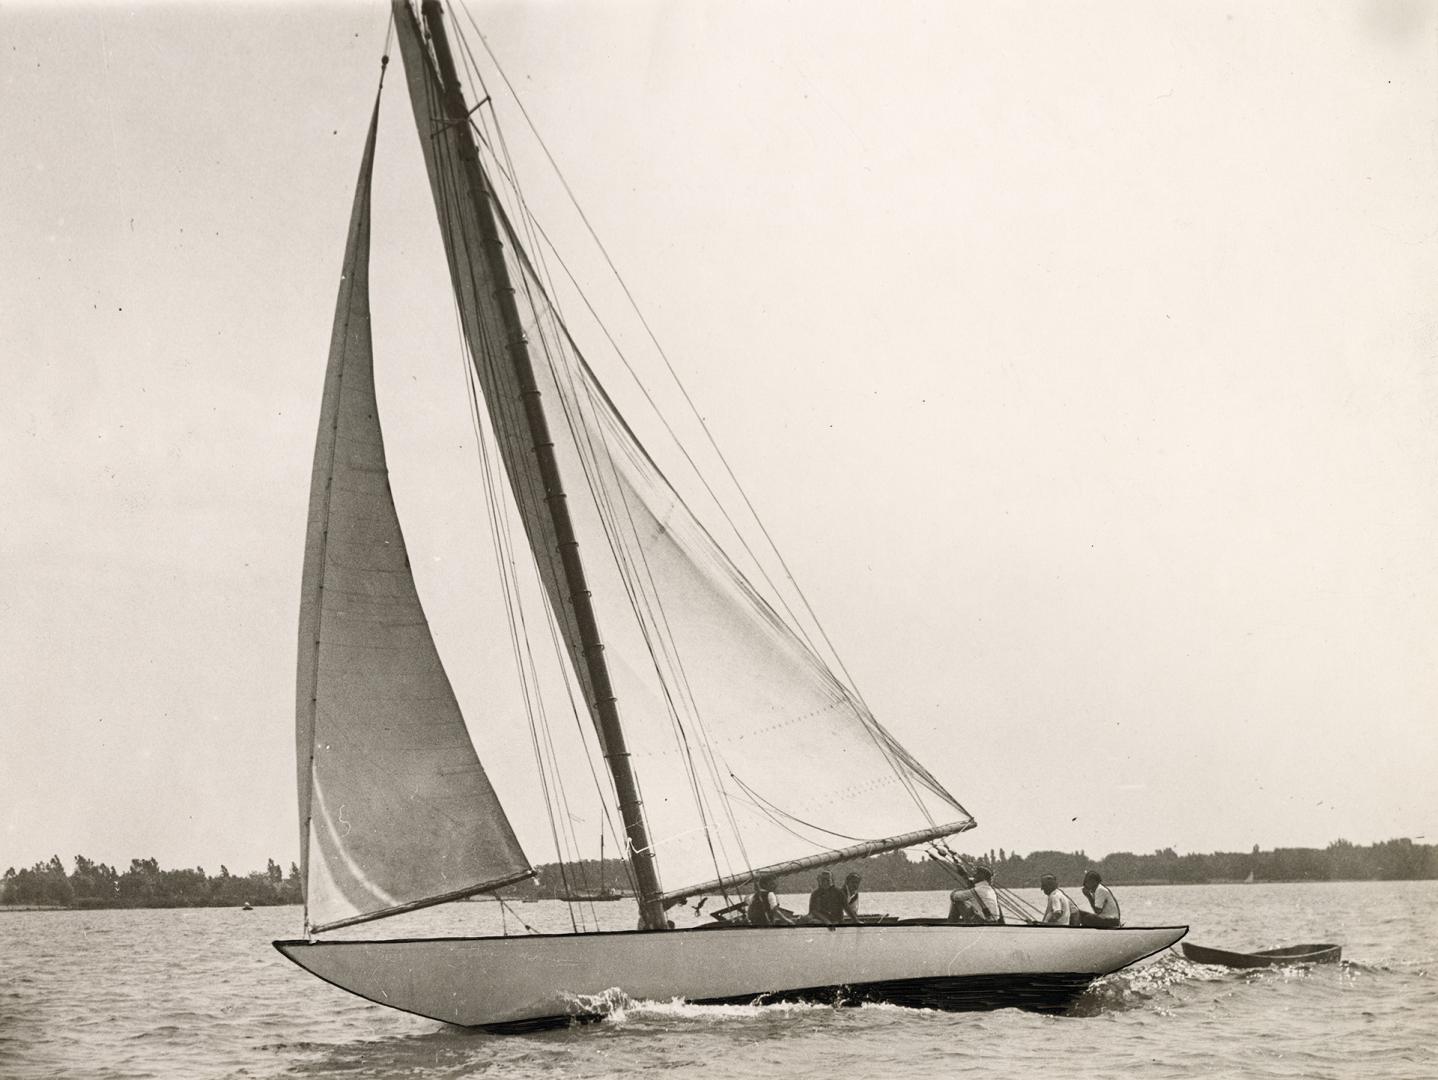 Black and white photograph of a yacht in full sail with the Toronto Islands in the background.